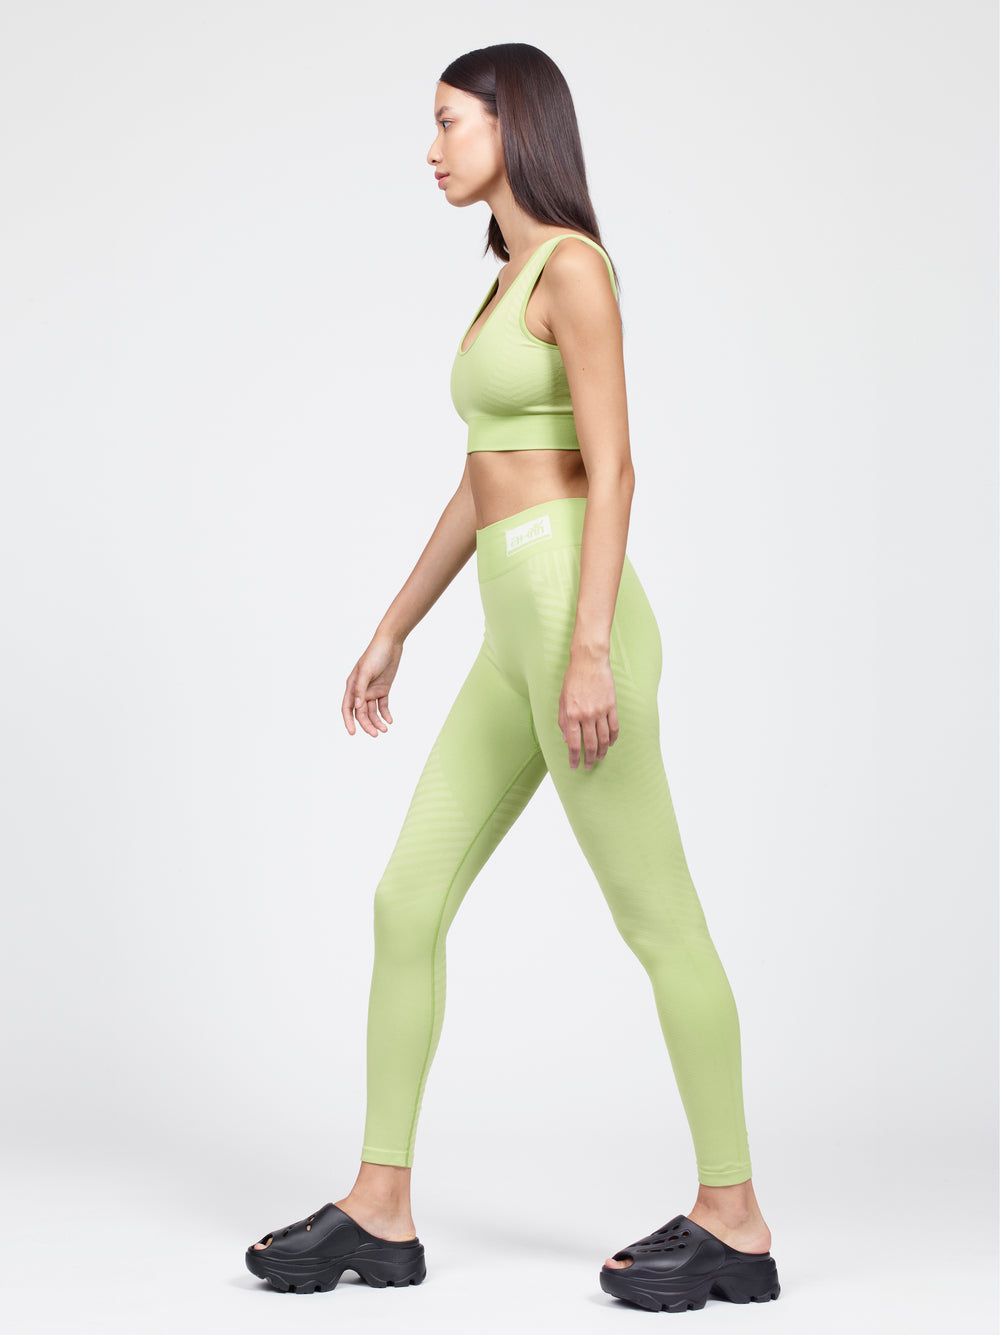 Compression Bra and Legging Sets – Awakened Heart and Mind